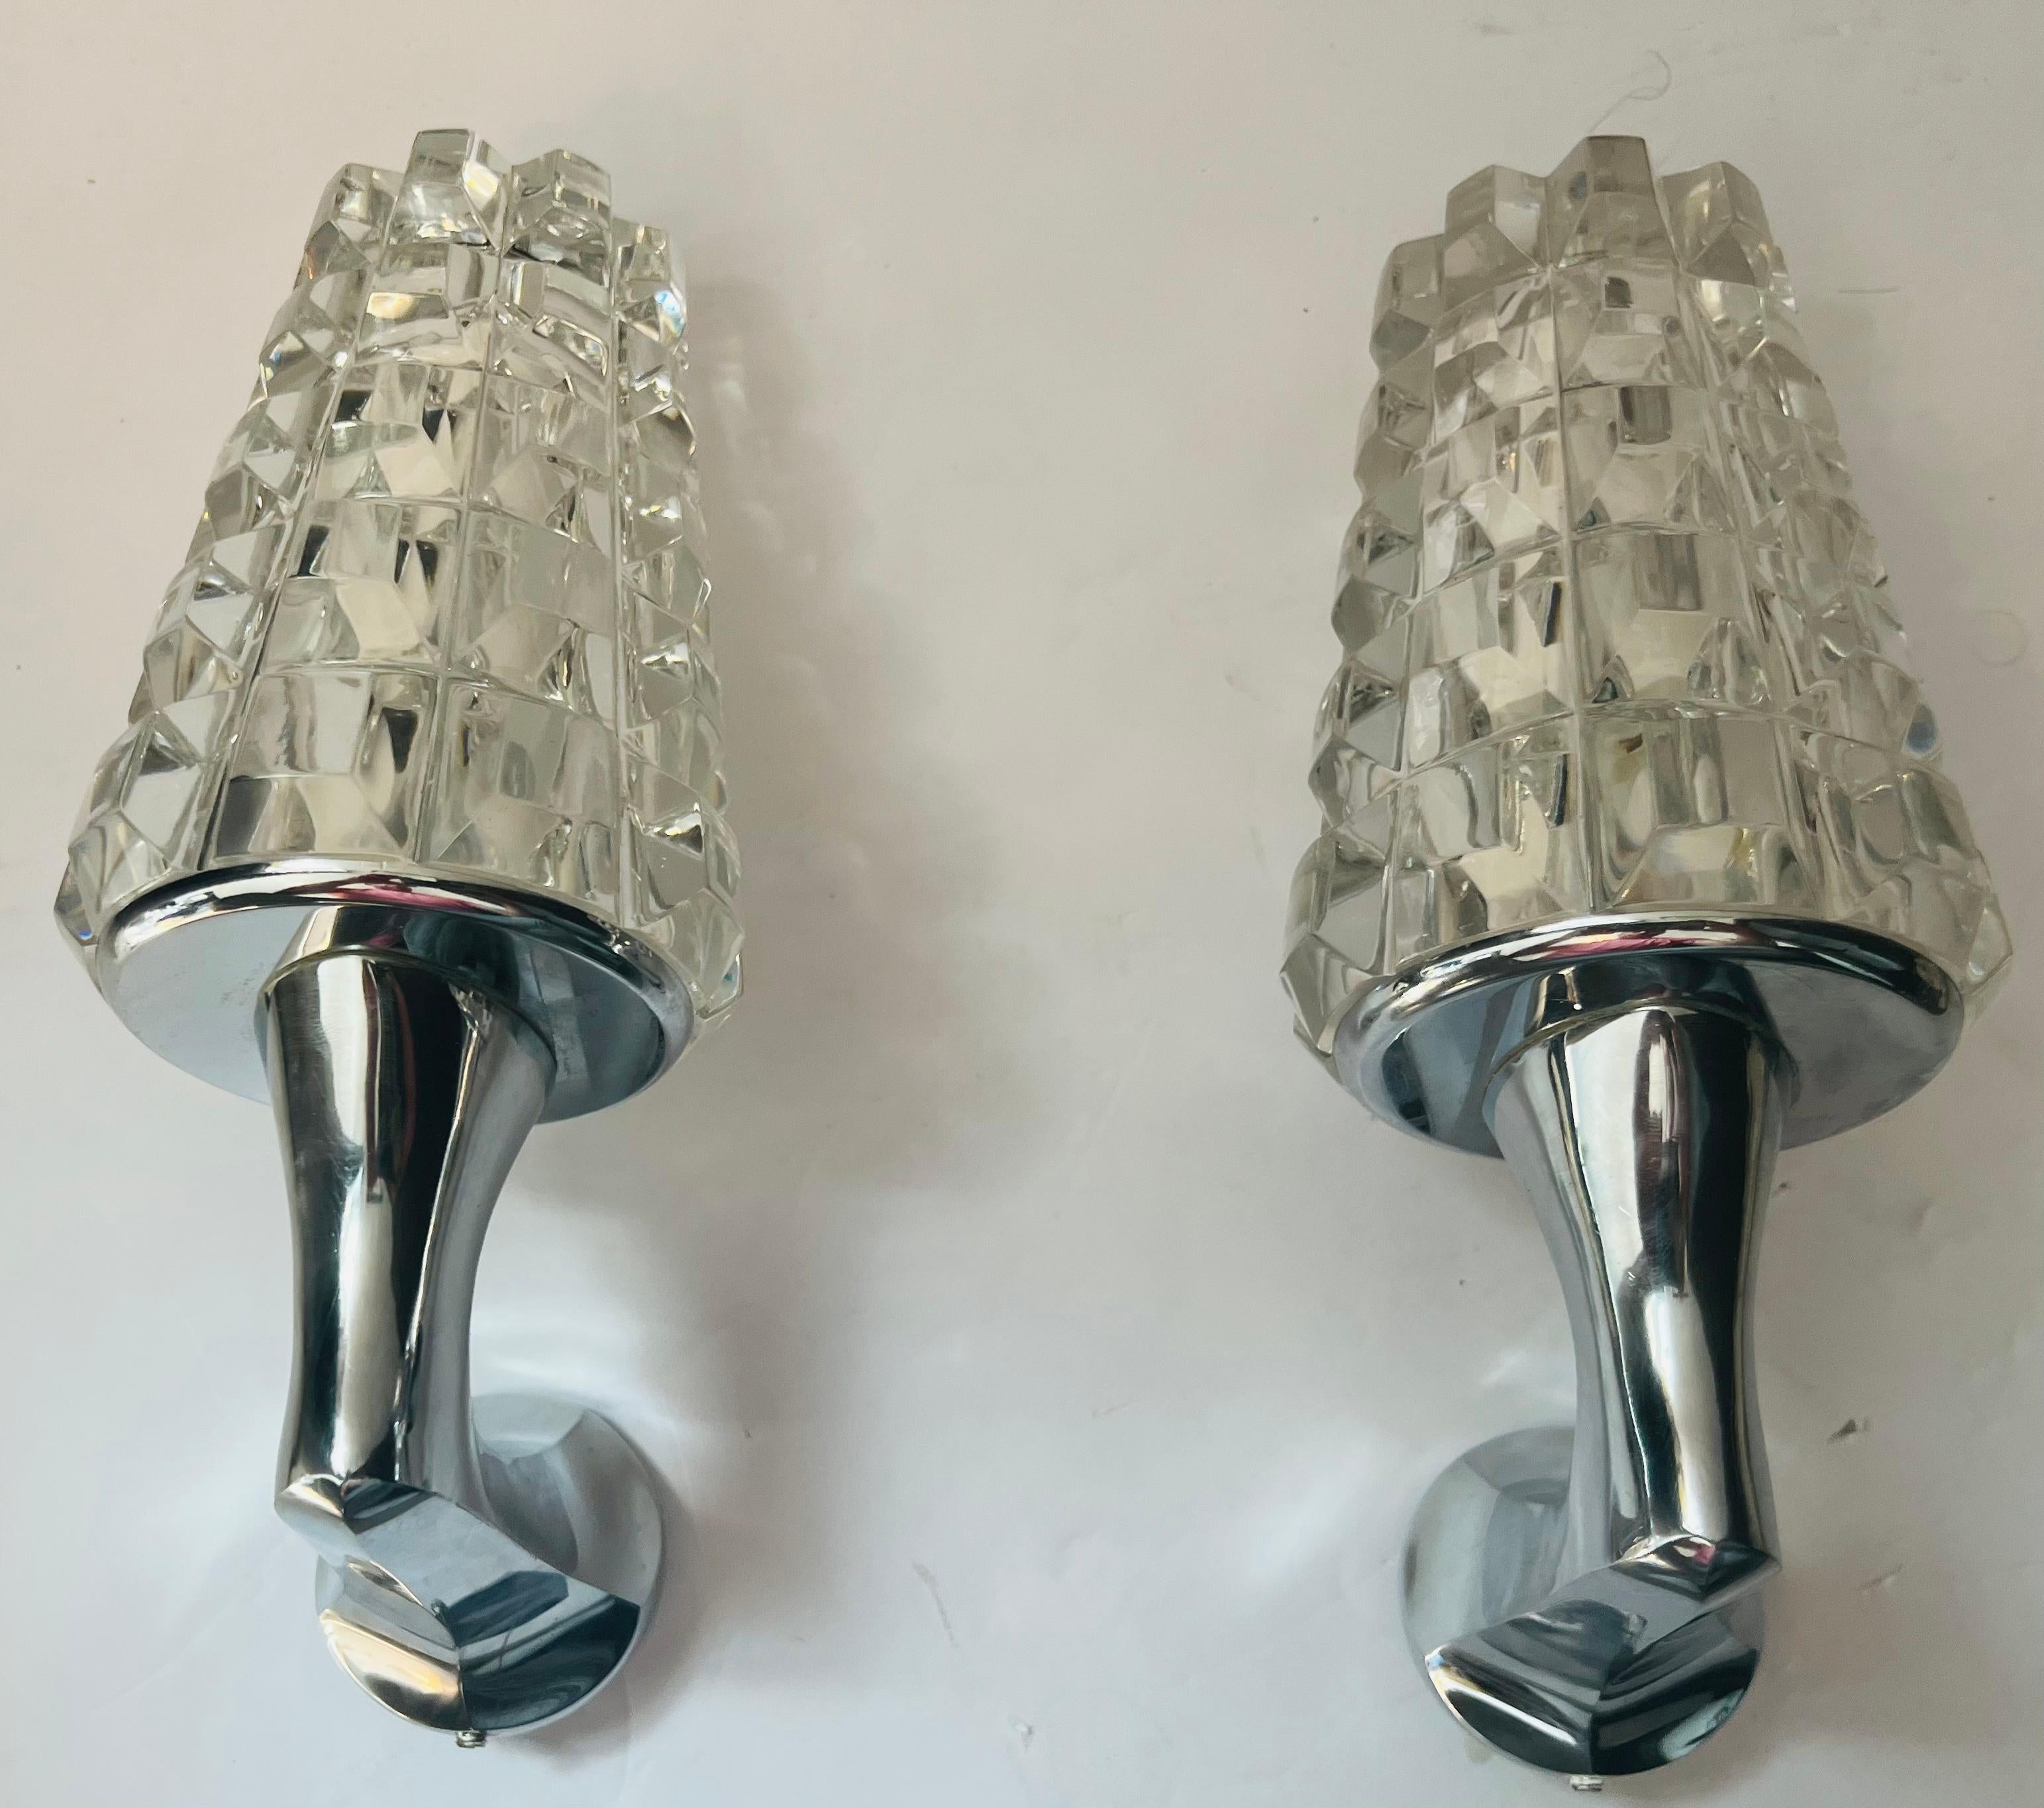 A beautiful rare pair of French polished nickel sconces with heavy thick faceted crystal shades. Newly rewired.